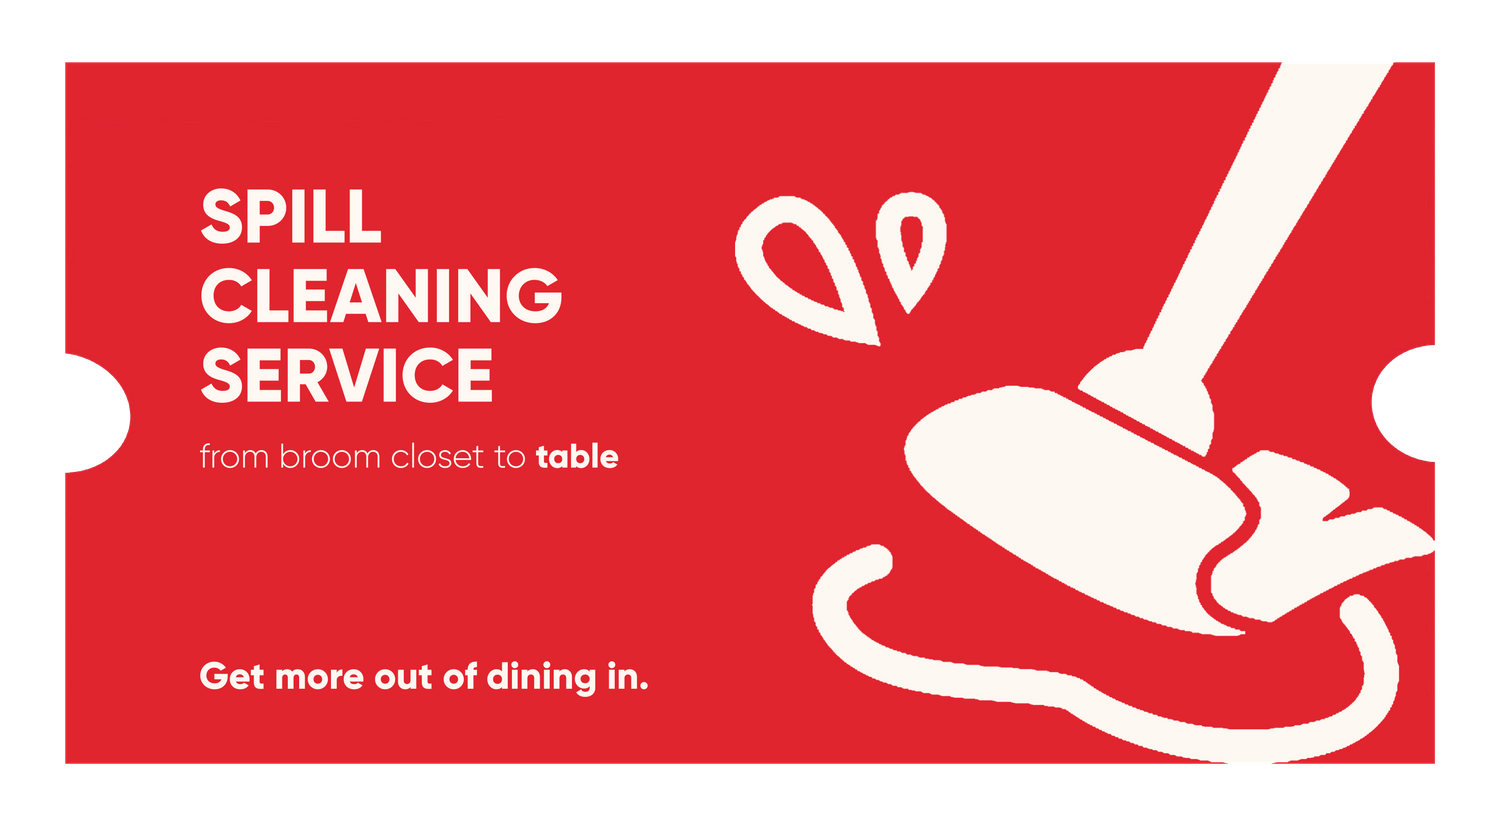 Swiss Chalet: Get more out of dining in